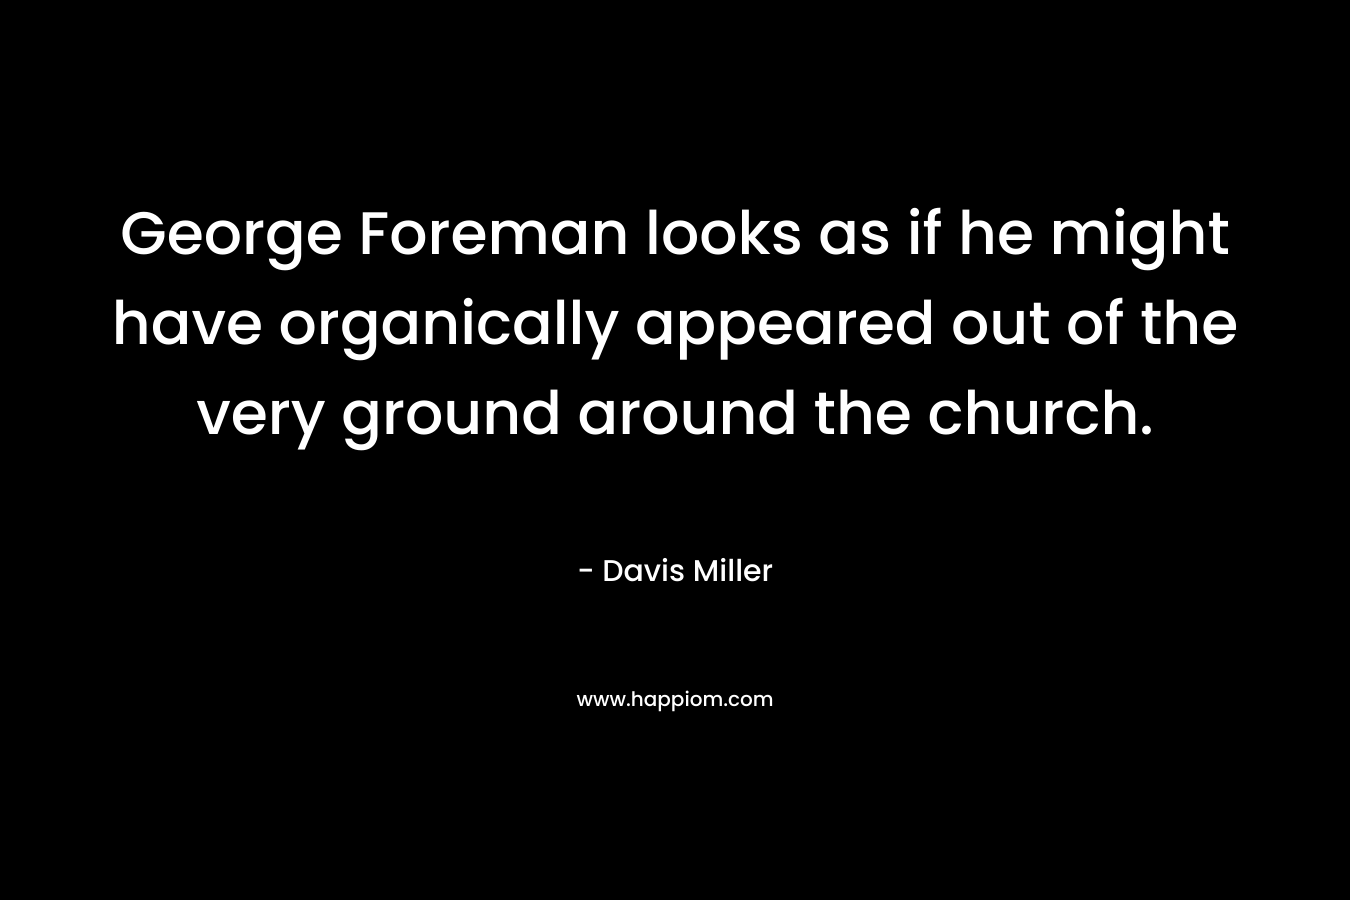 George Foreman looks as if he might have organically appeared out of the very ground around the church. – Davis Miller